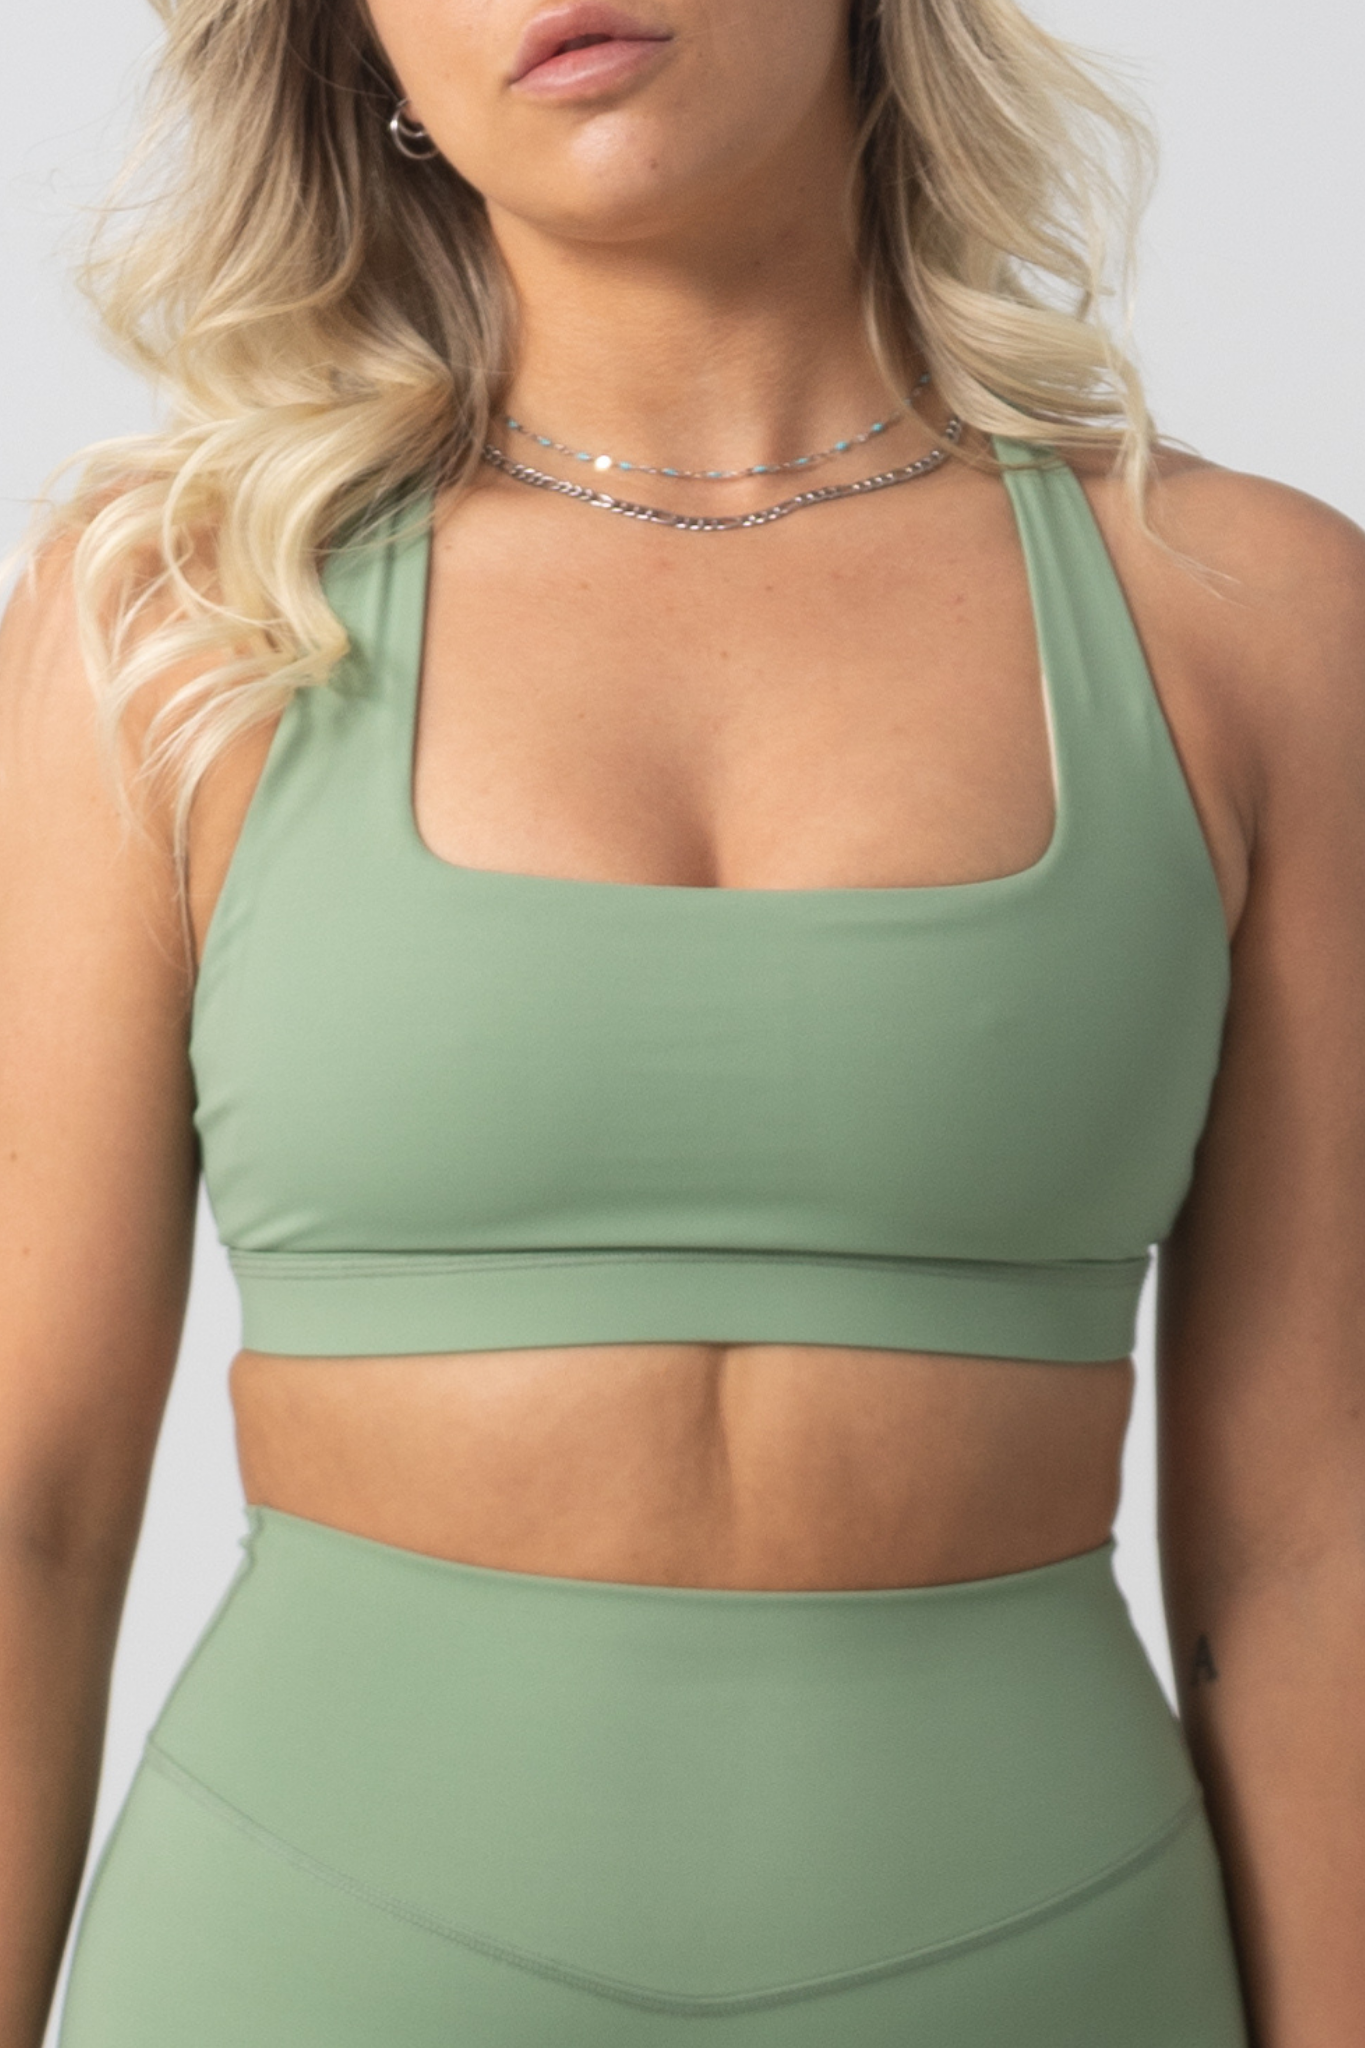 Round Neck with Removable Bra Cup Cotton Spandex Bra Top in Olive